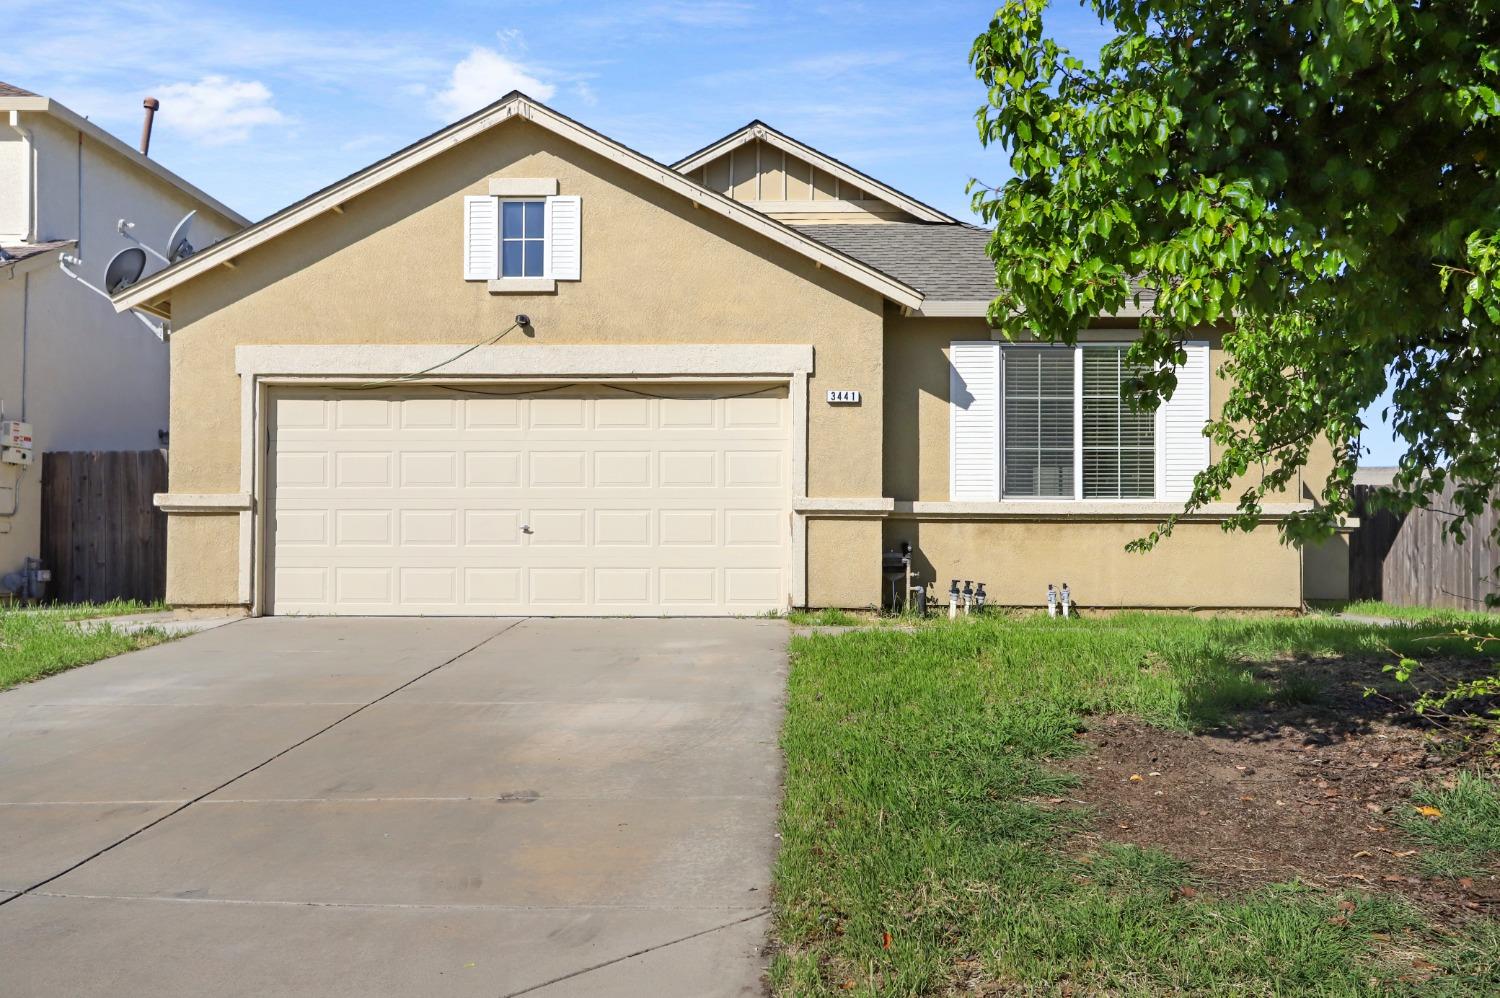 Photo of 3441 Carly Dr in Stockton, CA